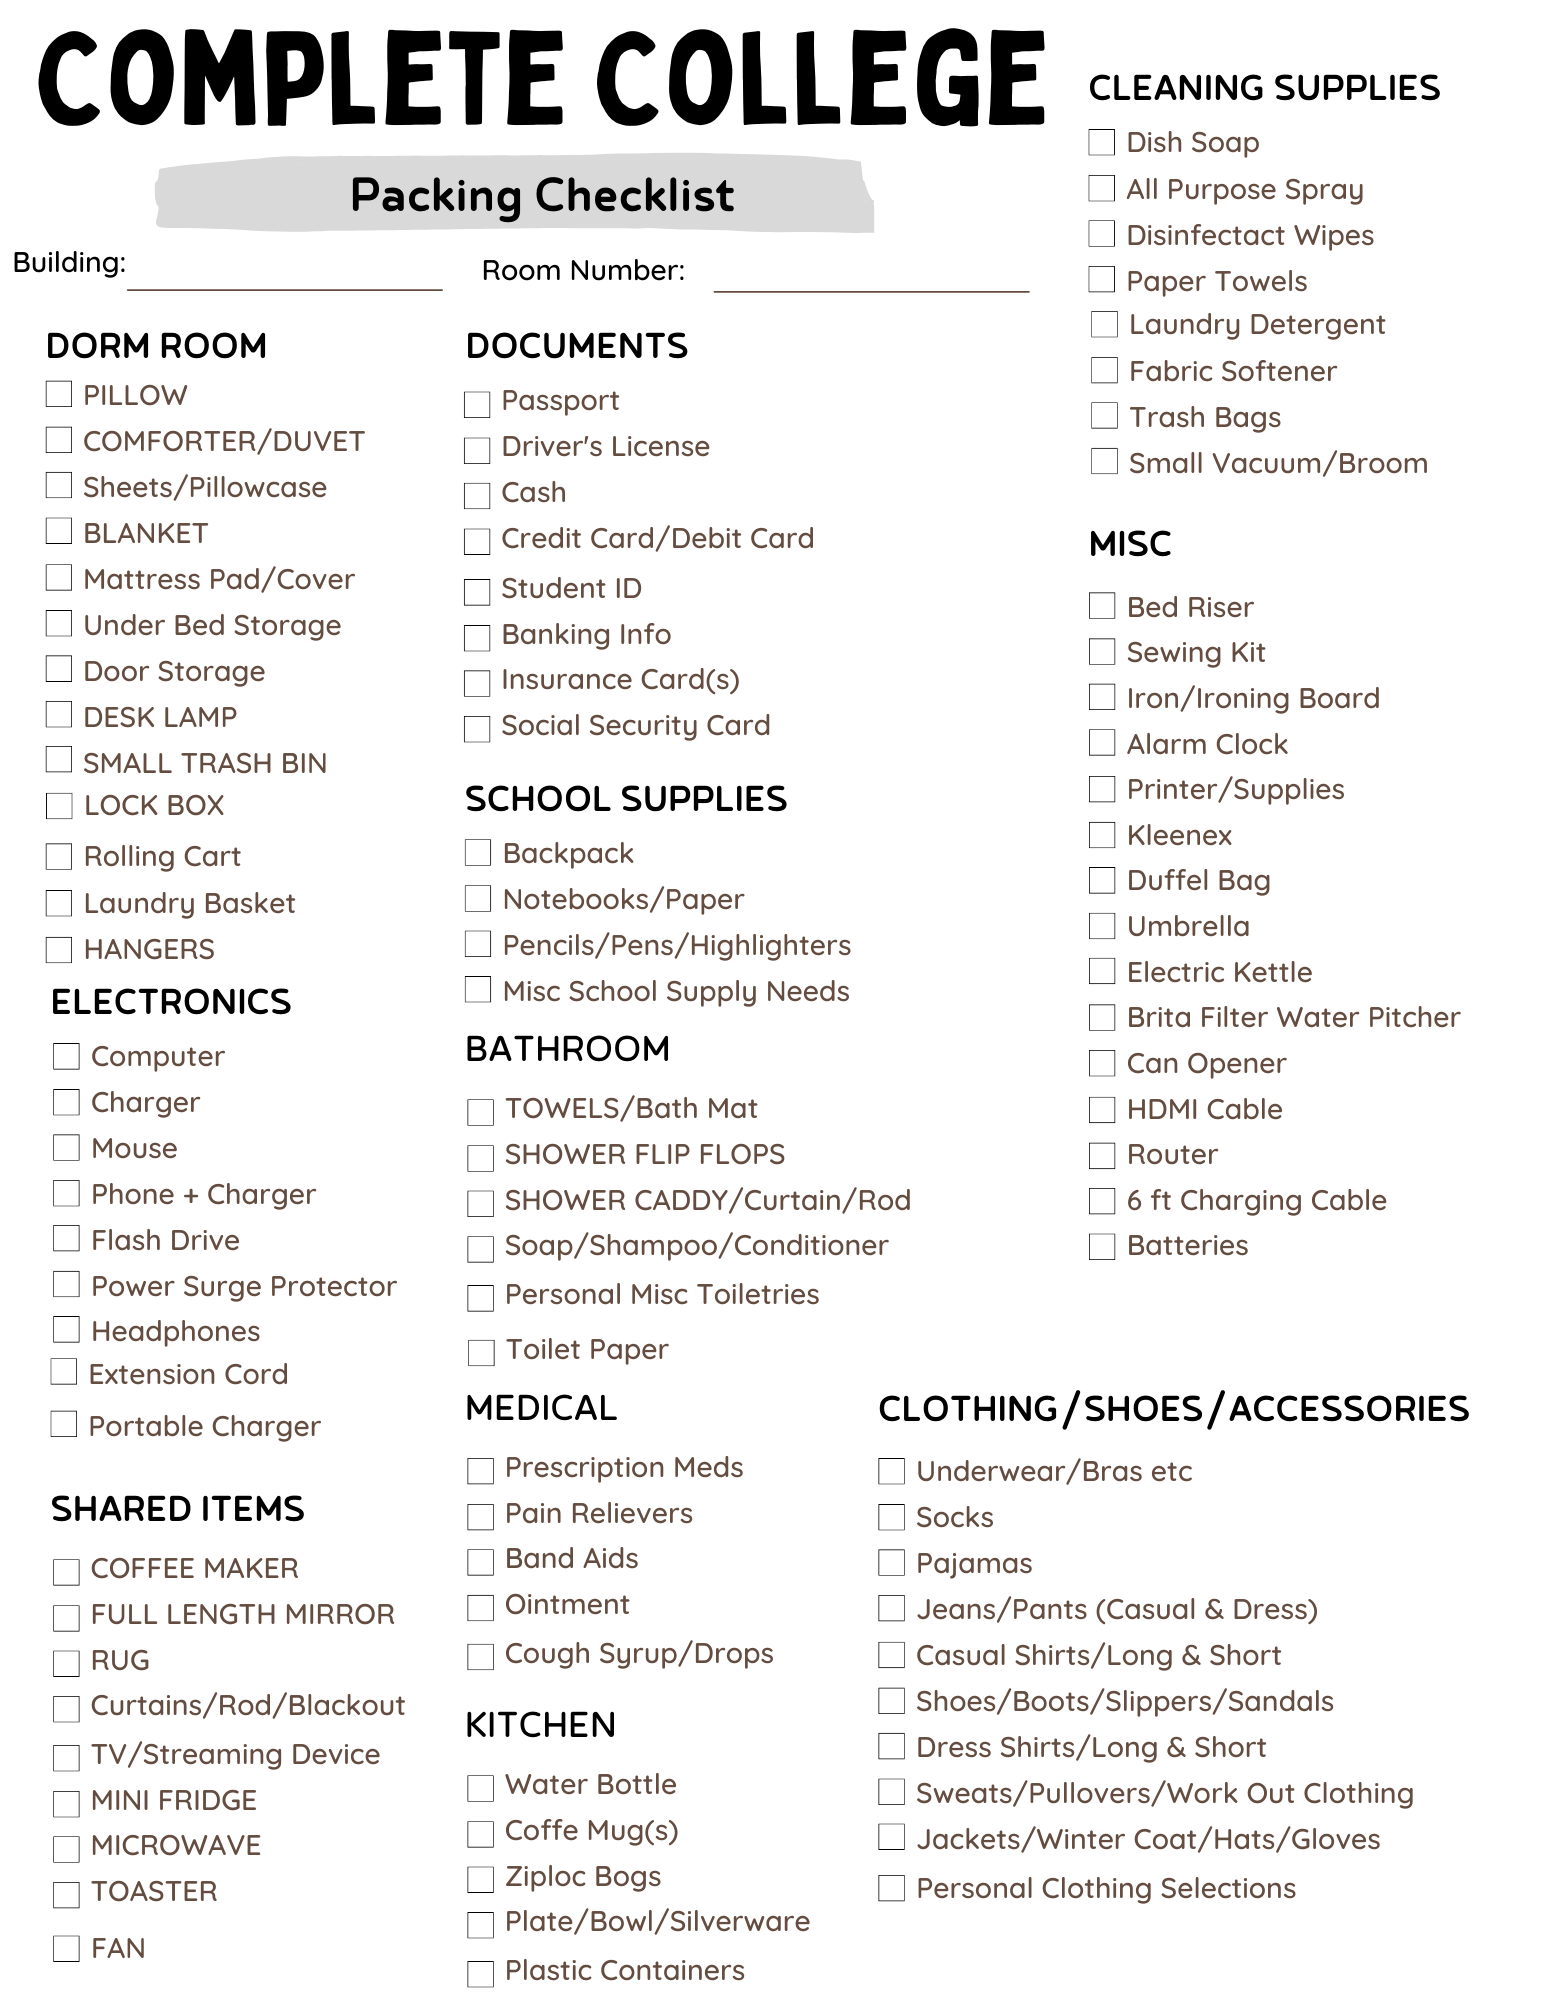 https://images.squarespace-cdn.com/content/v1/528ee19ce4b08dc23453ab7e/1660078607580-FQVWUF5XJ12LQXMEDG3Z/College+Packing++Checklist+.png?format=2500w